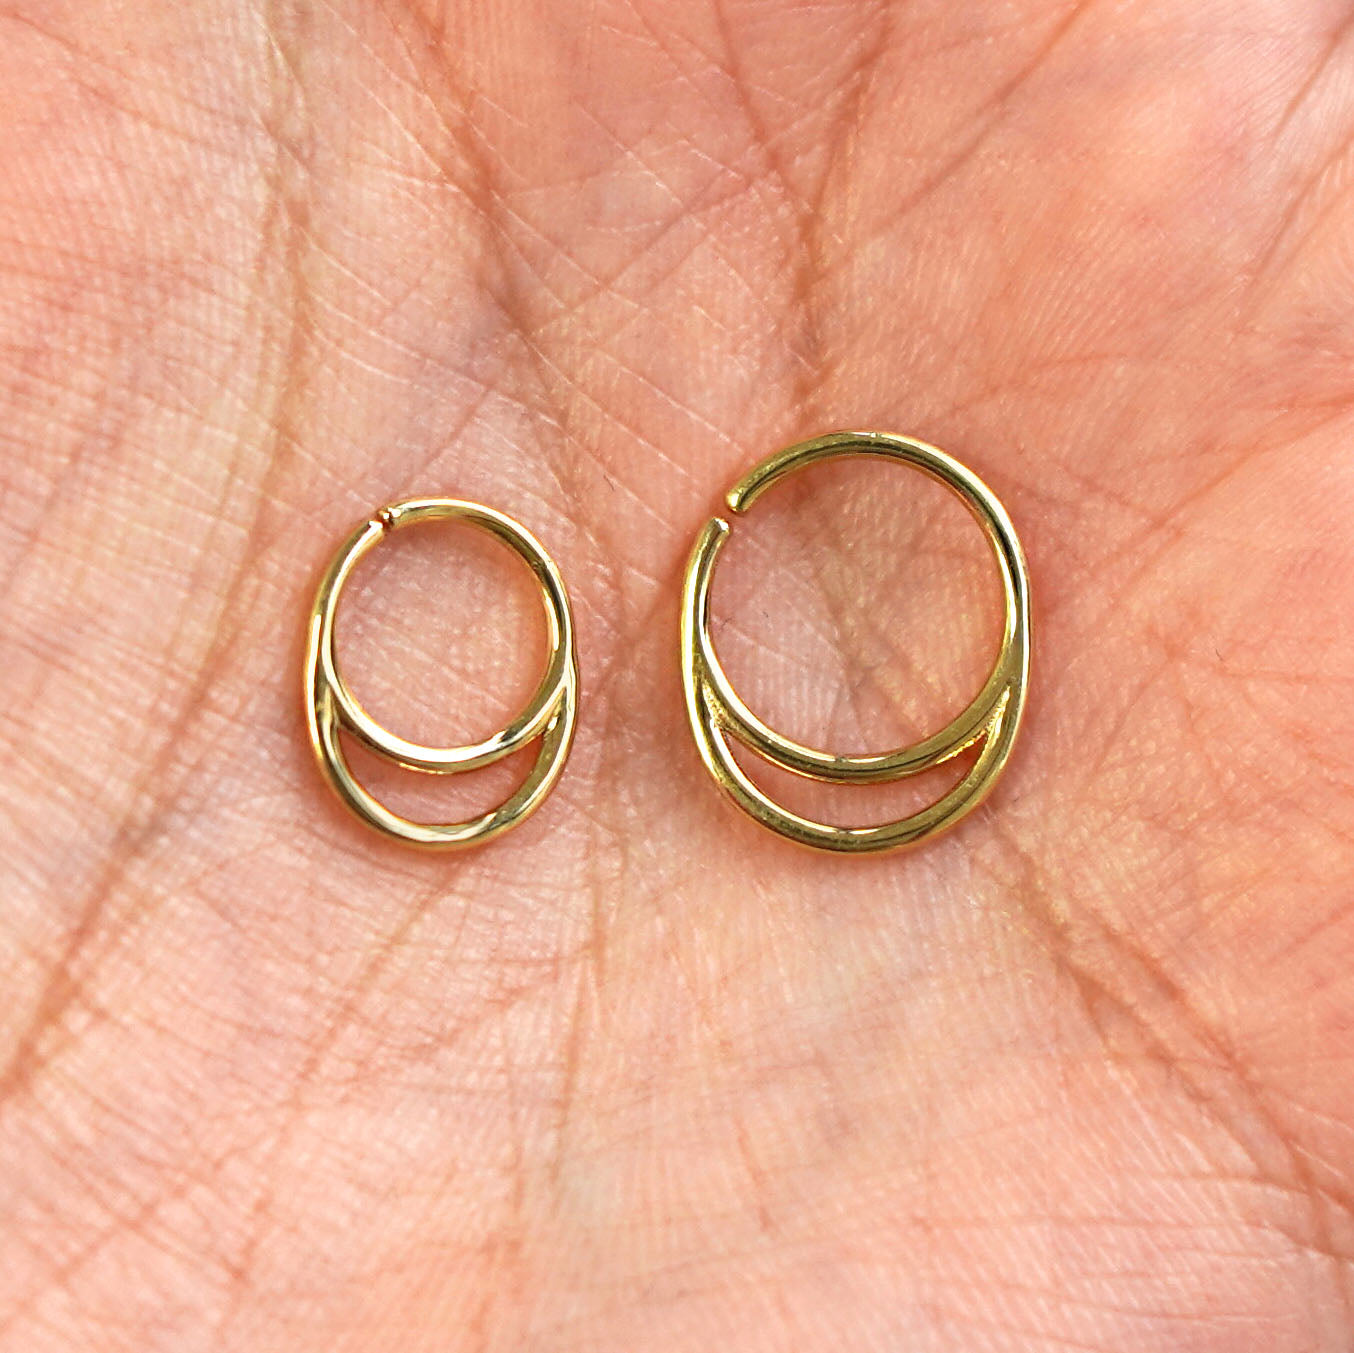 A model's palm holding two versions of the pierced Double Circle Septum showing the 8mm and 10mm sizes